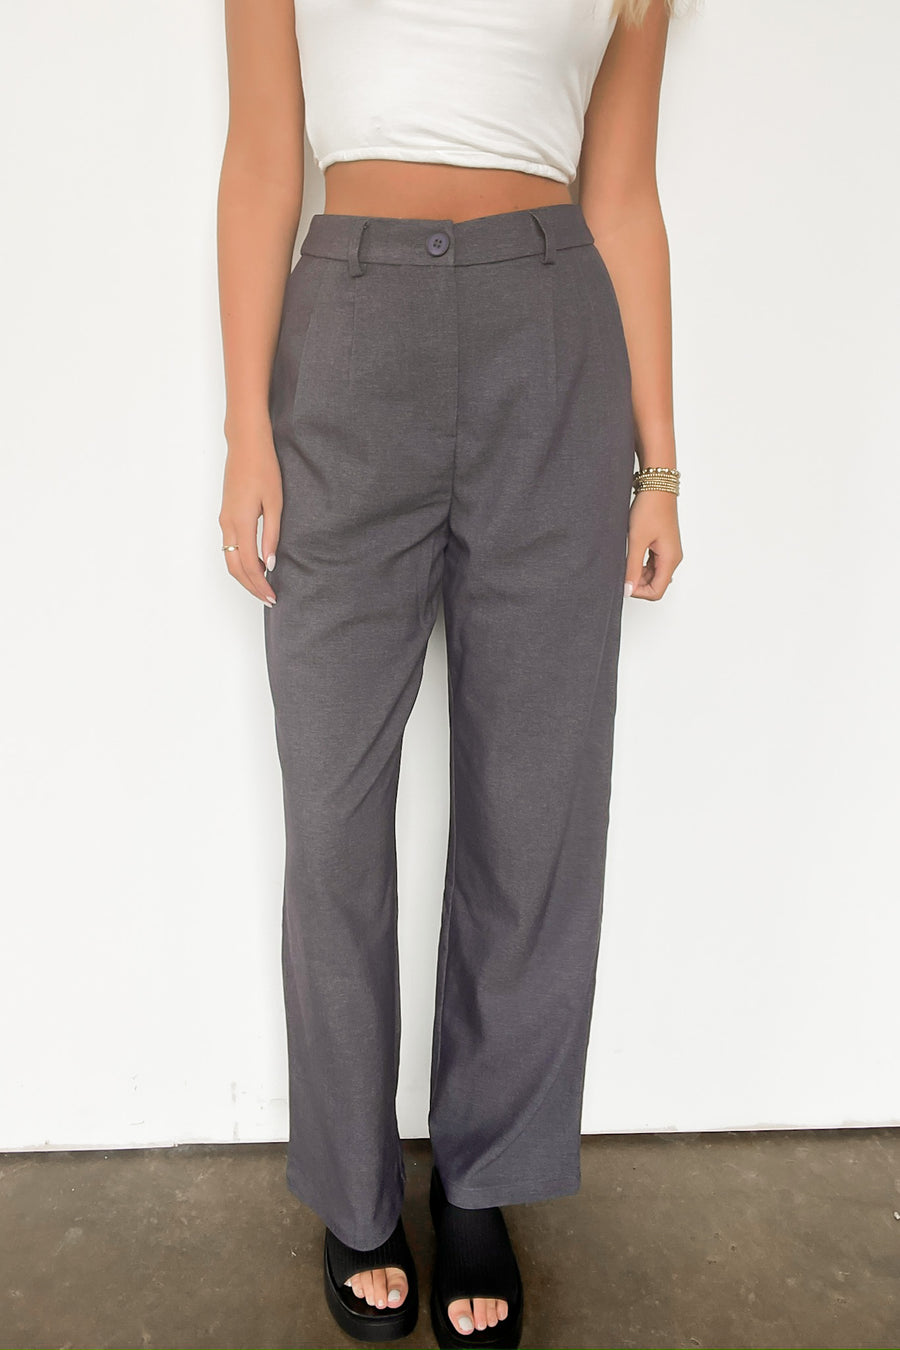 Charcoal / S Trendsetting Poise High Rise Pleated Pants - Madison and Mallory